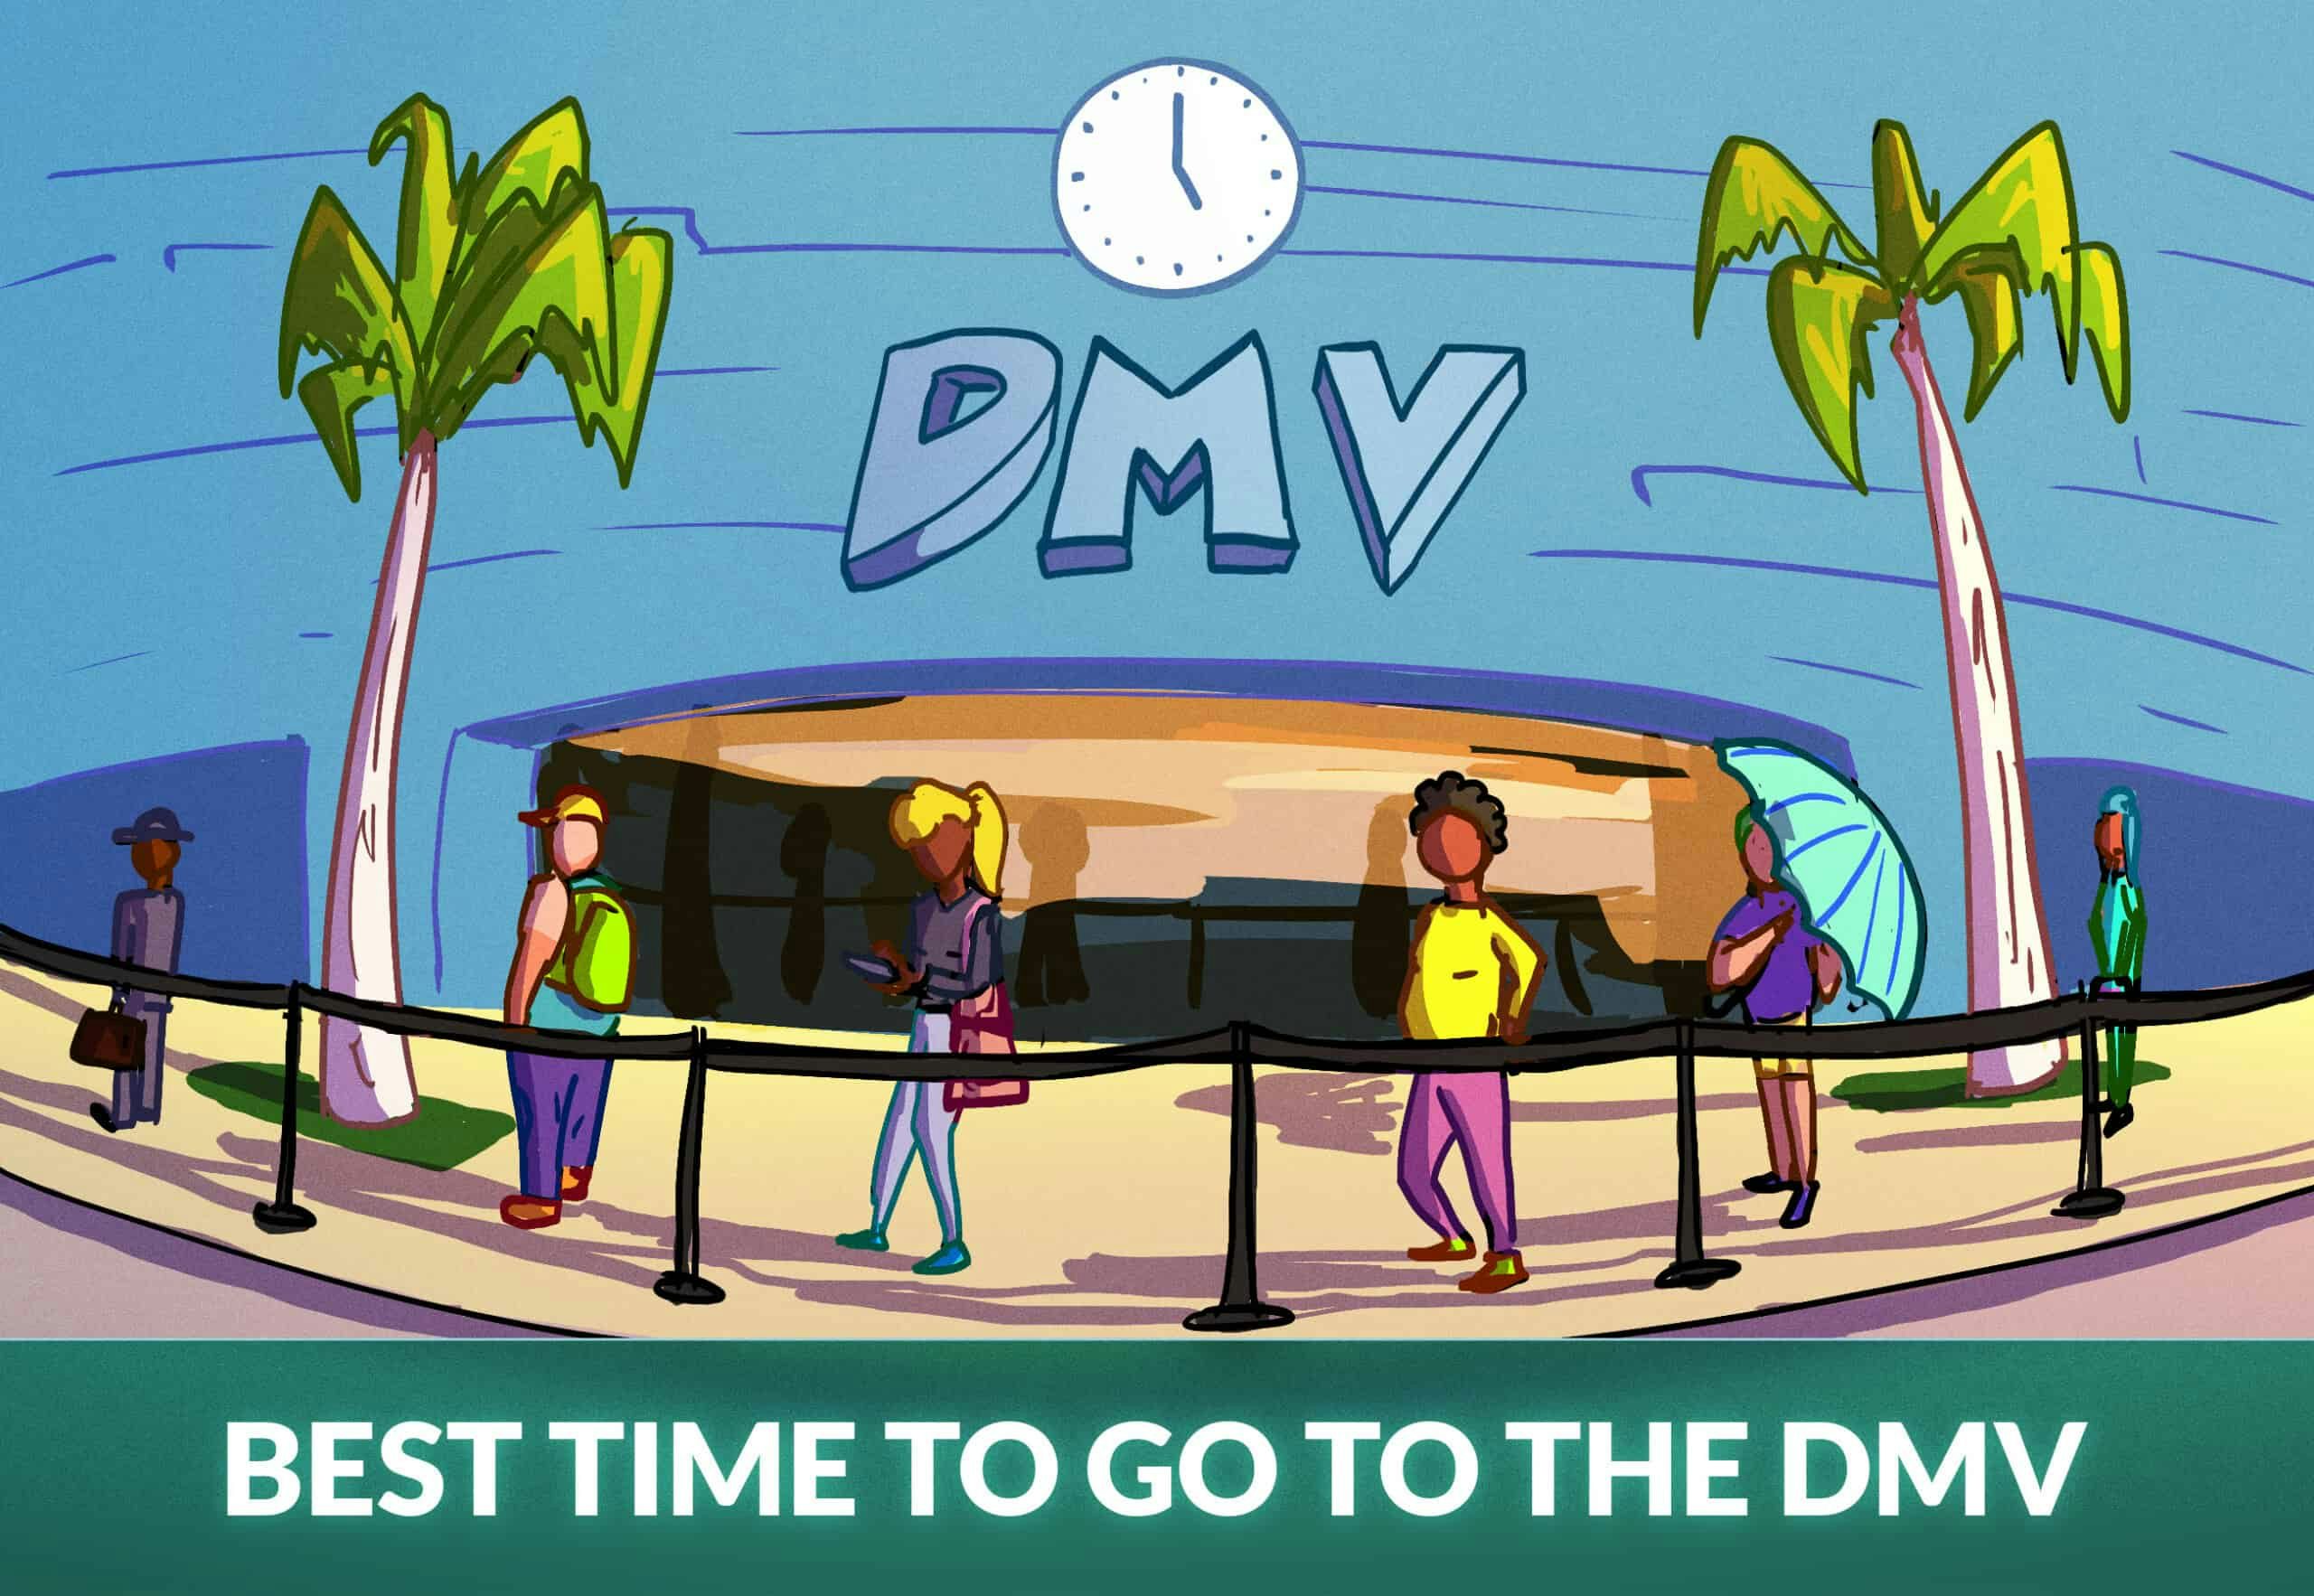 When Is the Best Time to Go to the DMV? 4 Time-Saving Tips to Avoid Long Wait Times